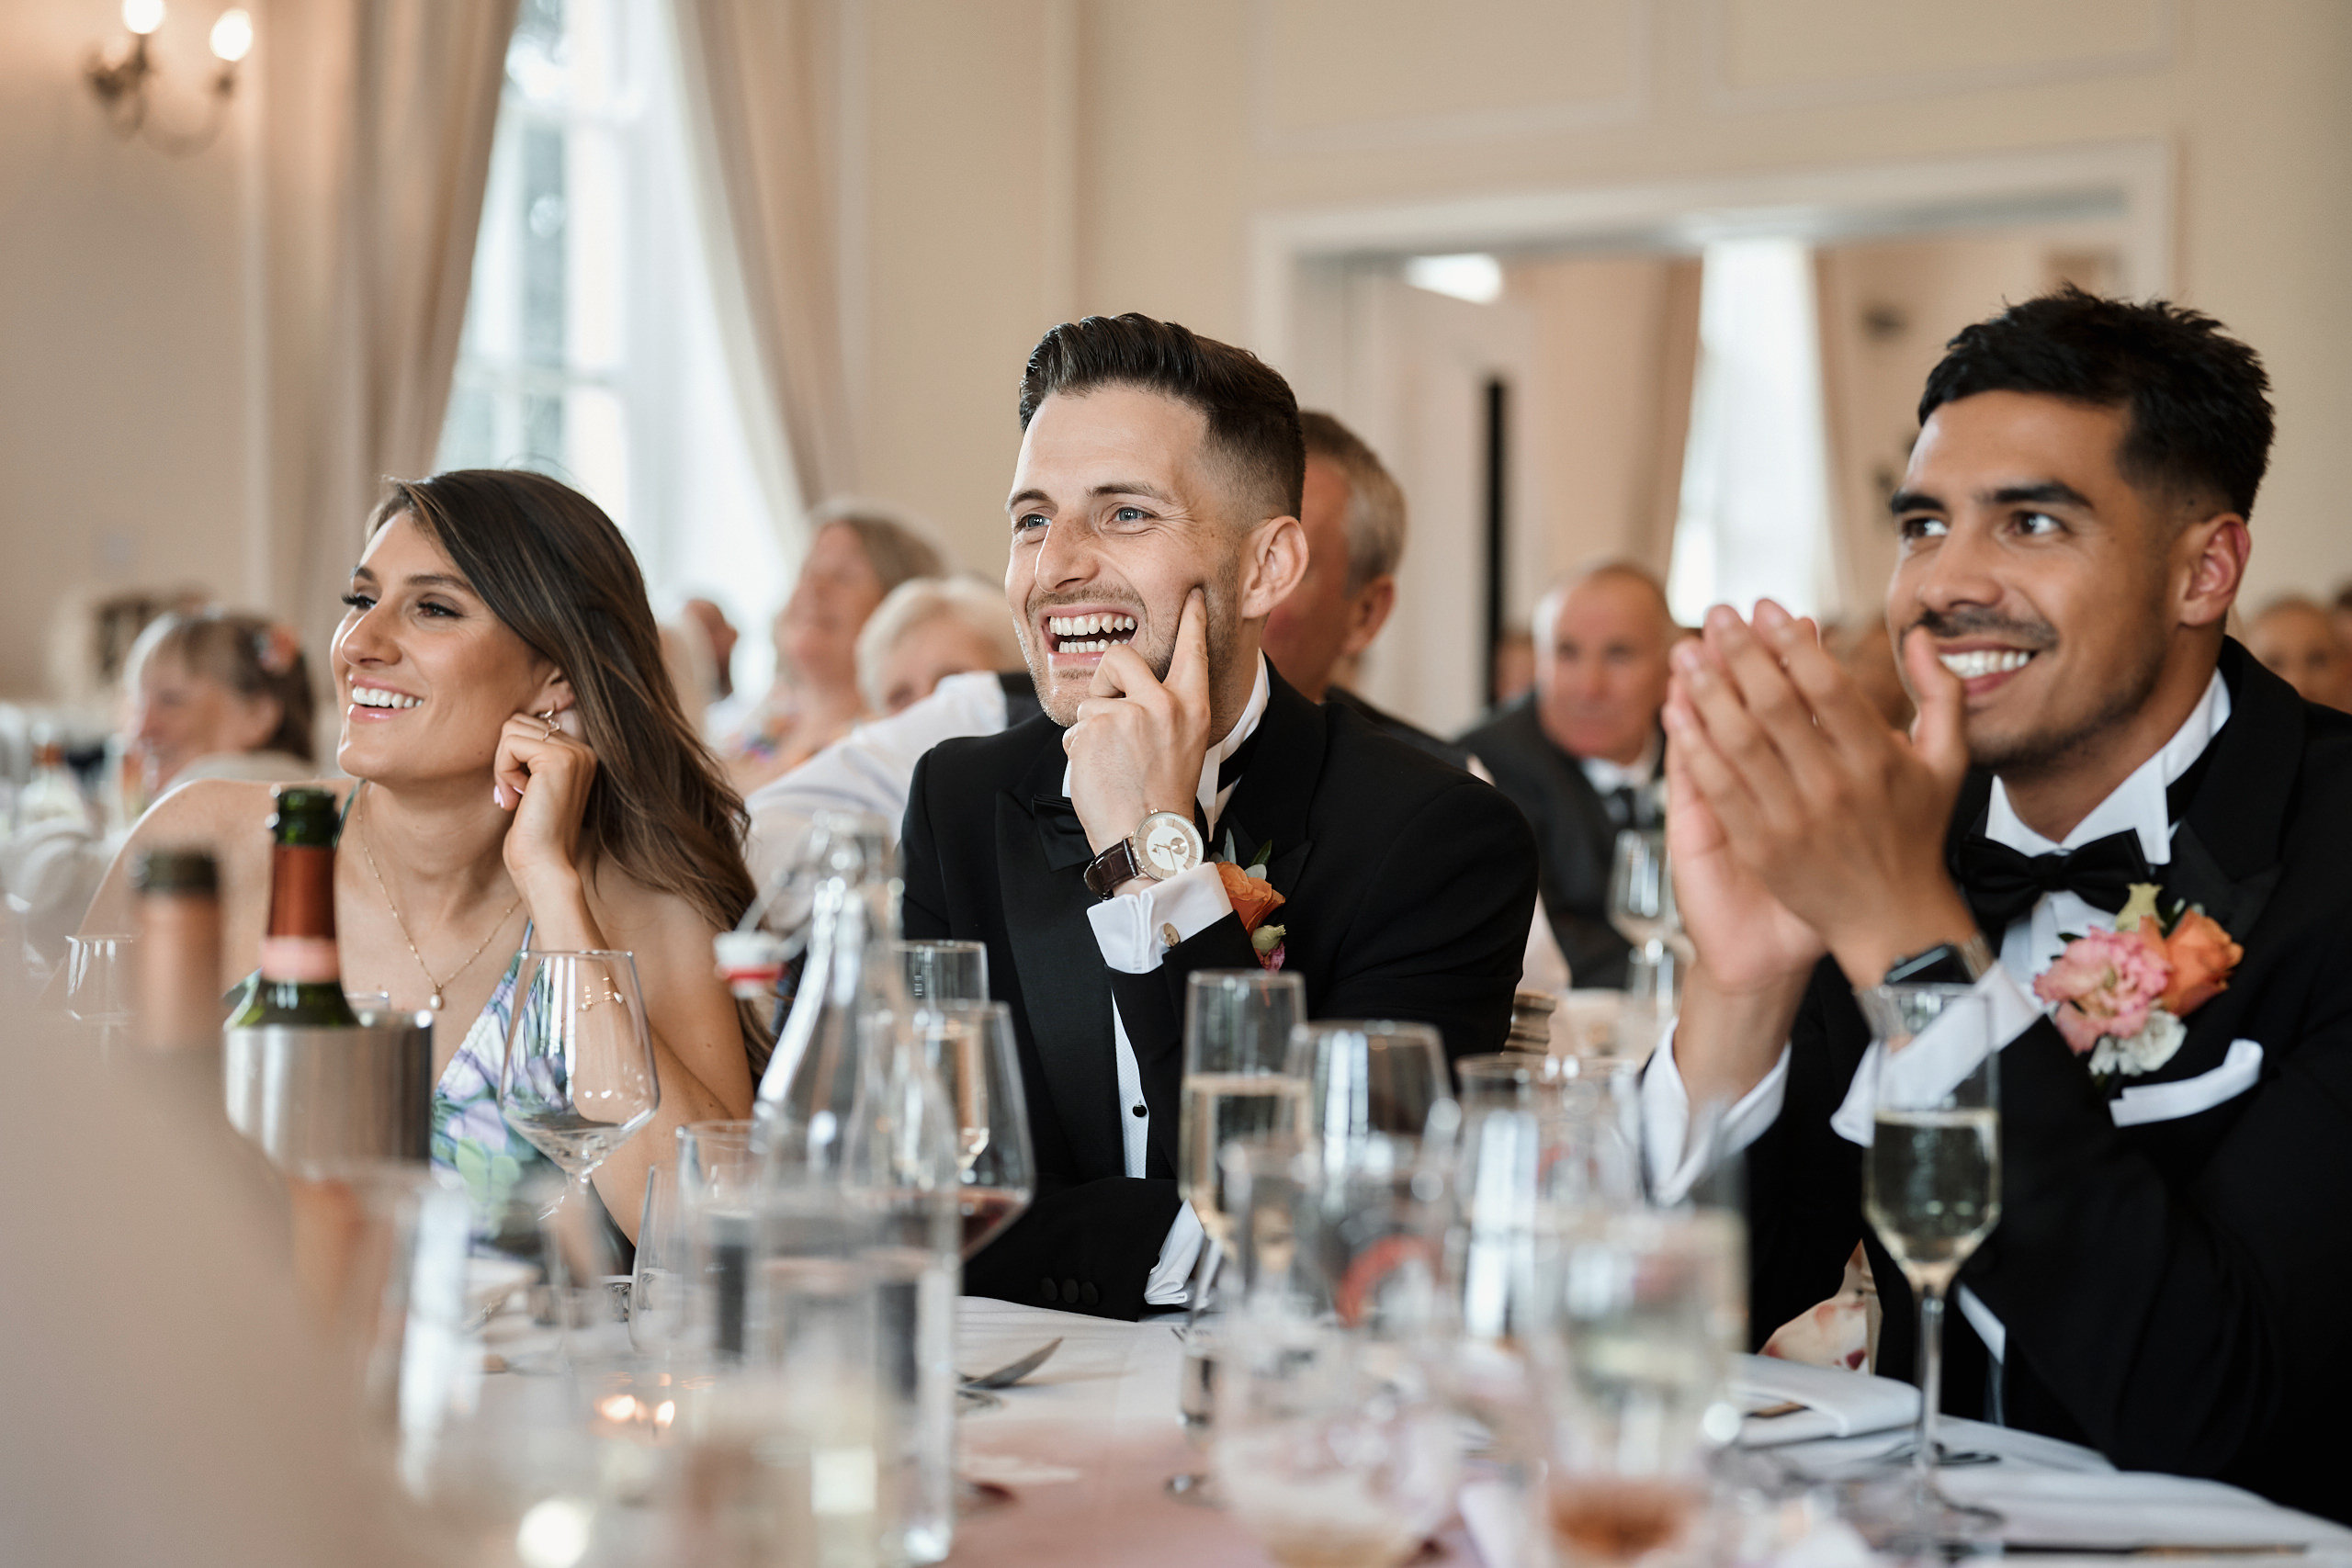 A group of people clapping at a wedding reception.